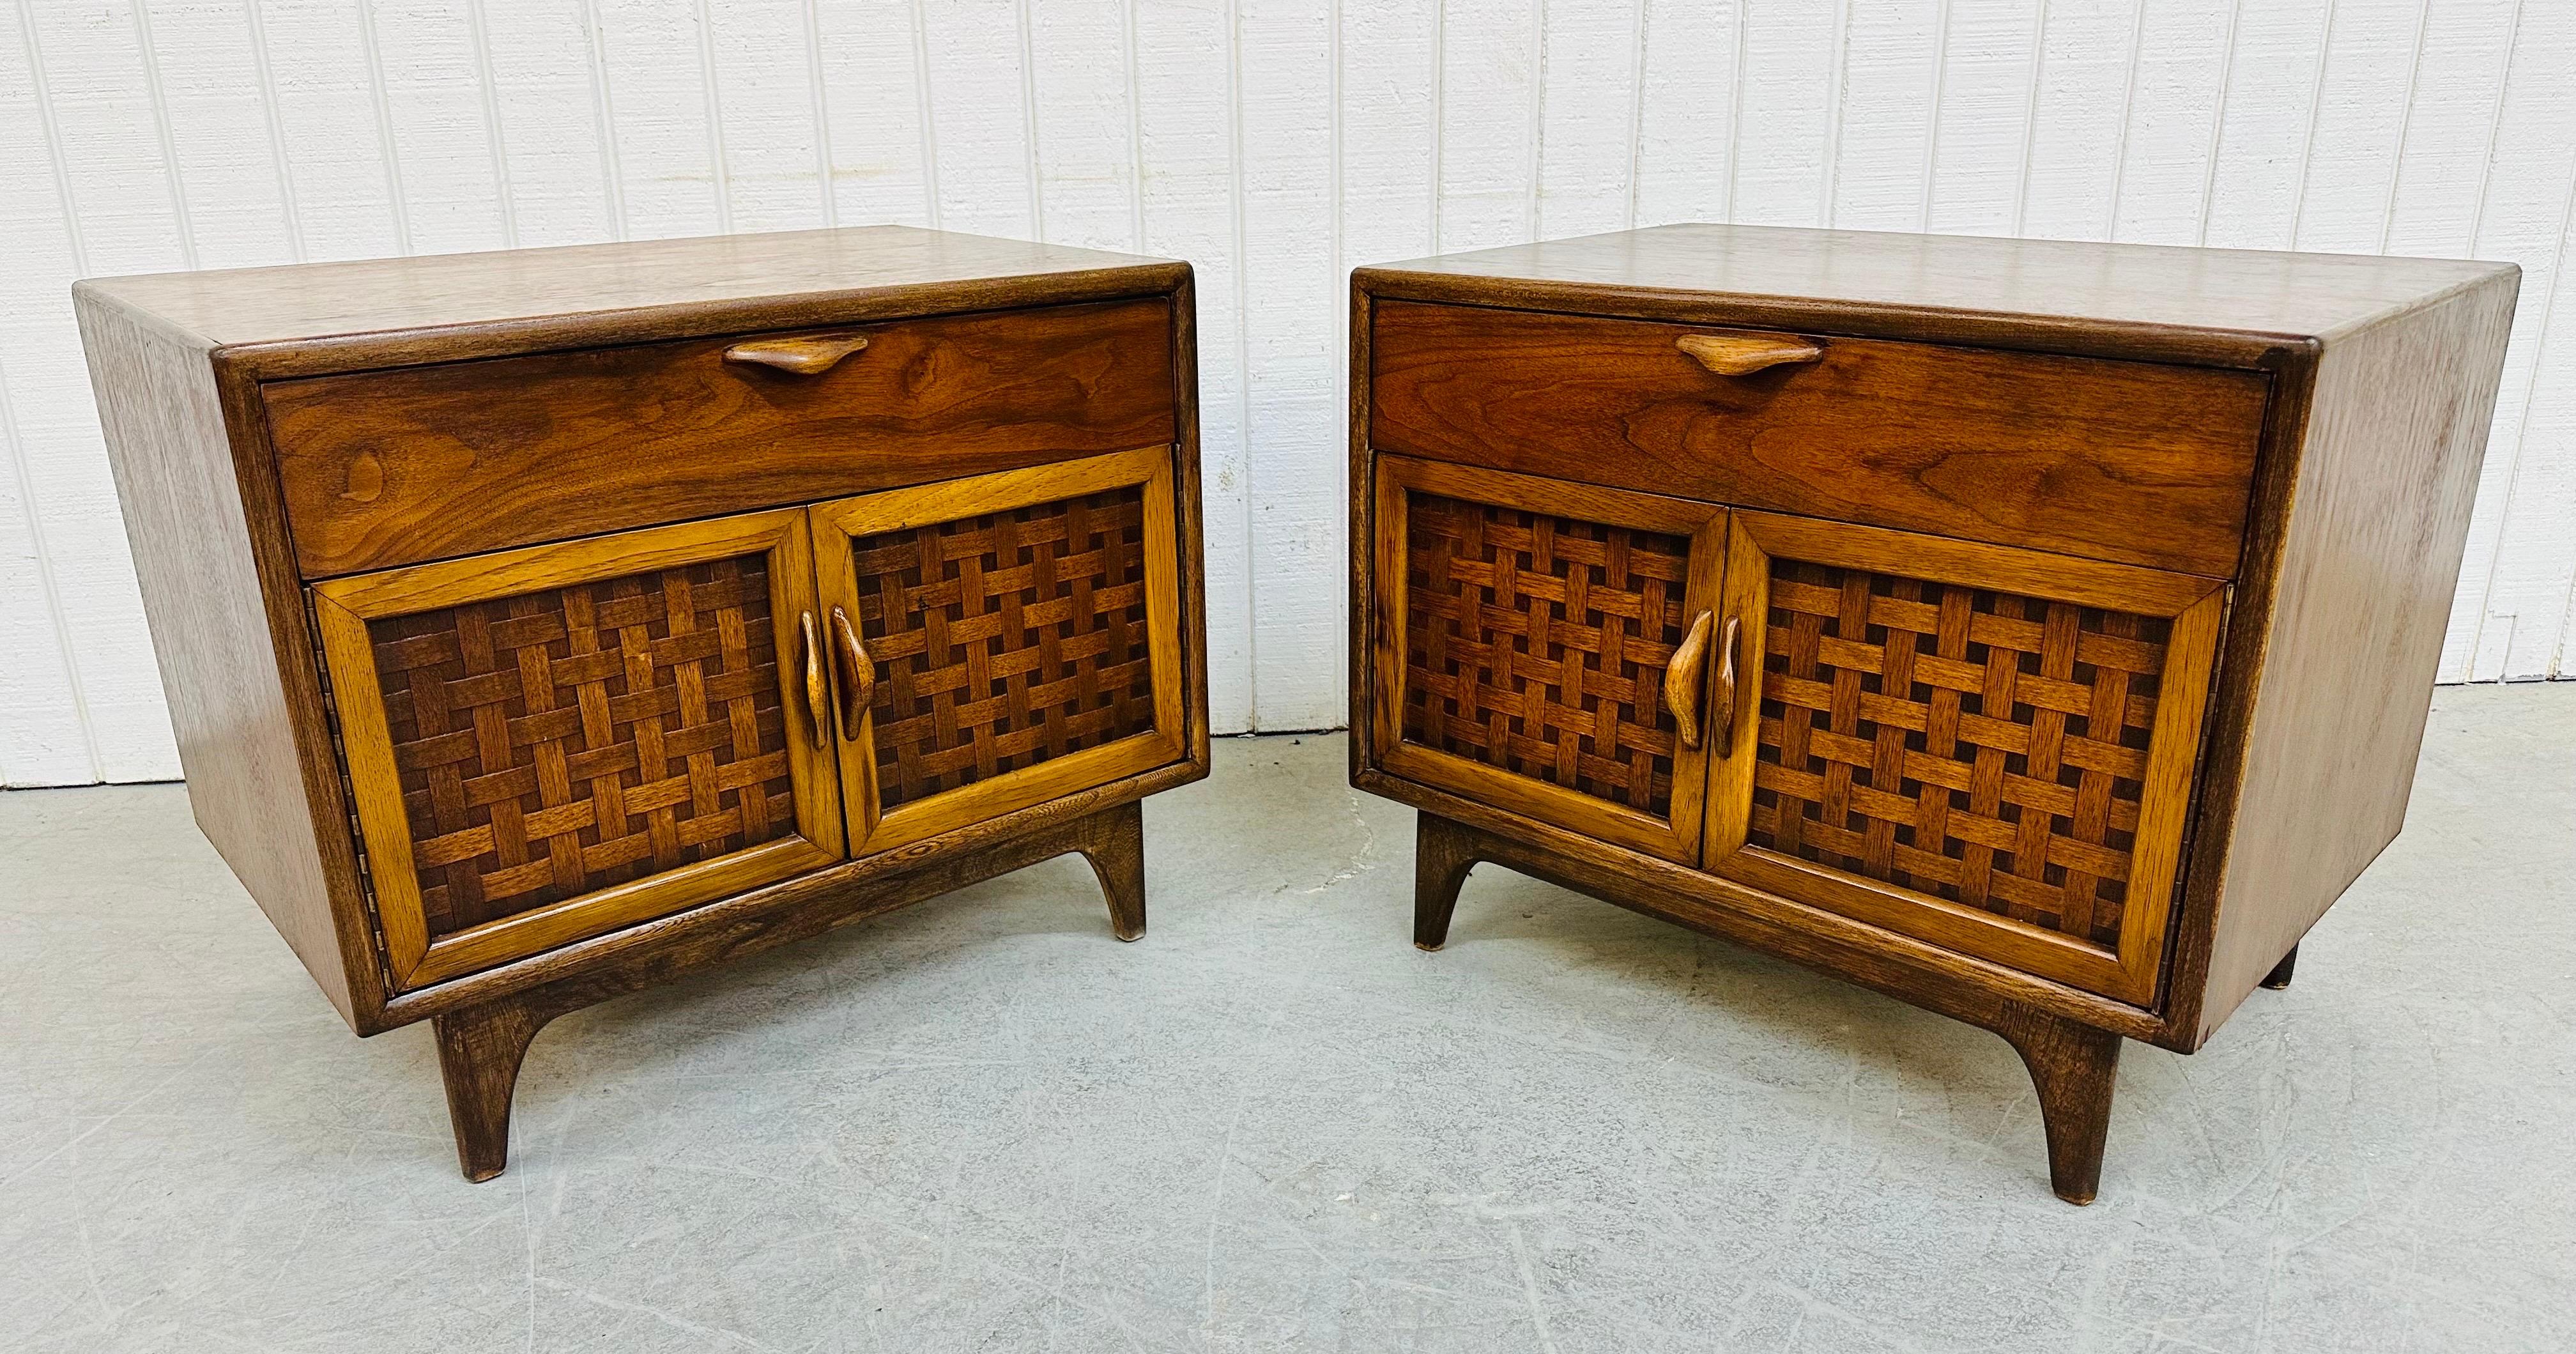 This listing is for a pair of Mid-Century Modern Lane Perception Walnut Nightstands. Featuring a cube shaped design sitting on modern legs, single drawer at the top with a sculpted wooden pull, two basket weaved doors with a sculpted wooden pull